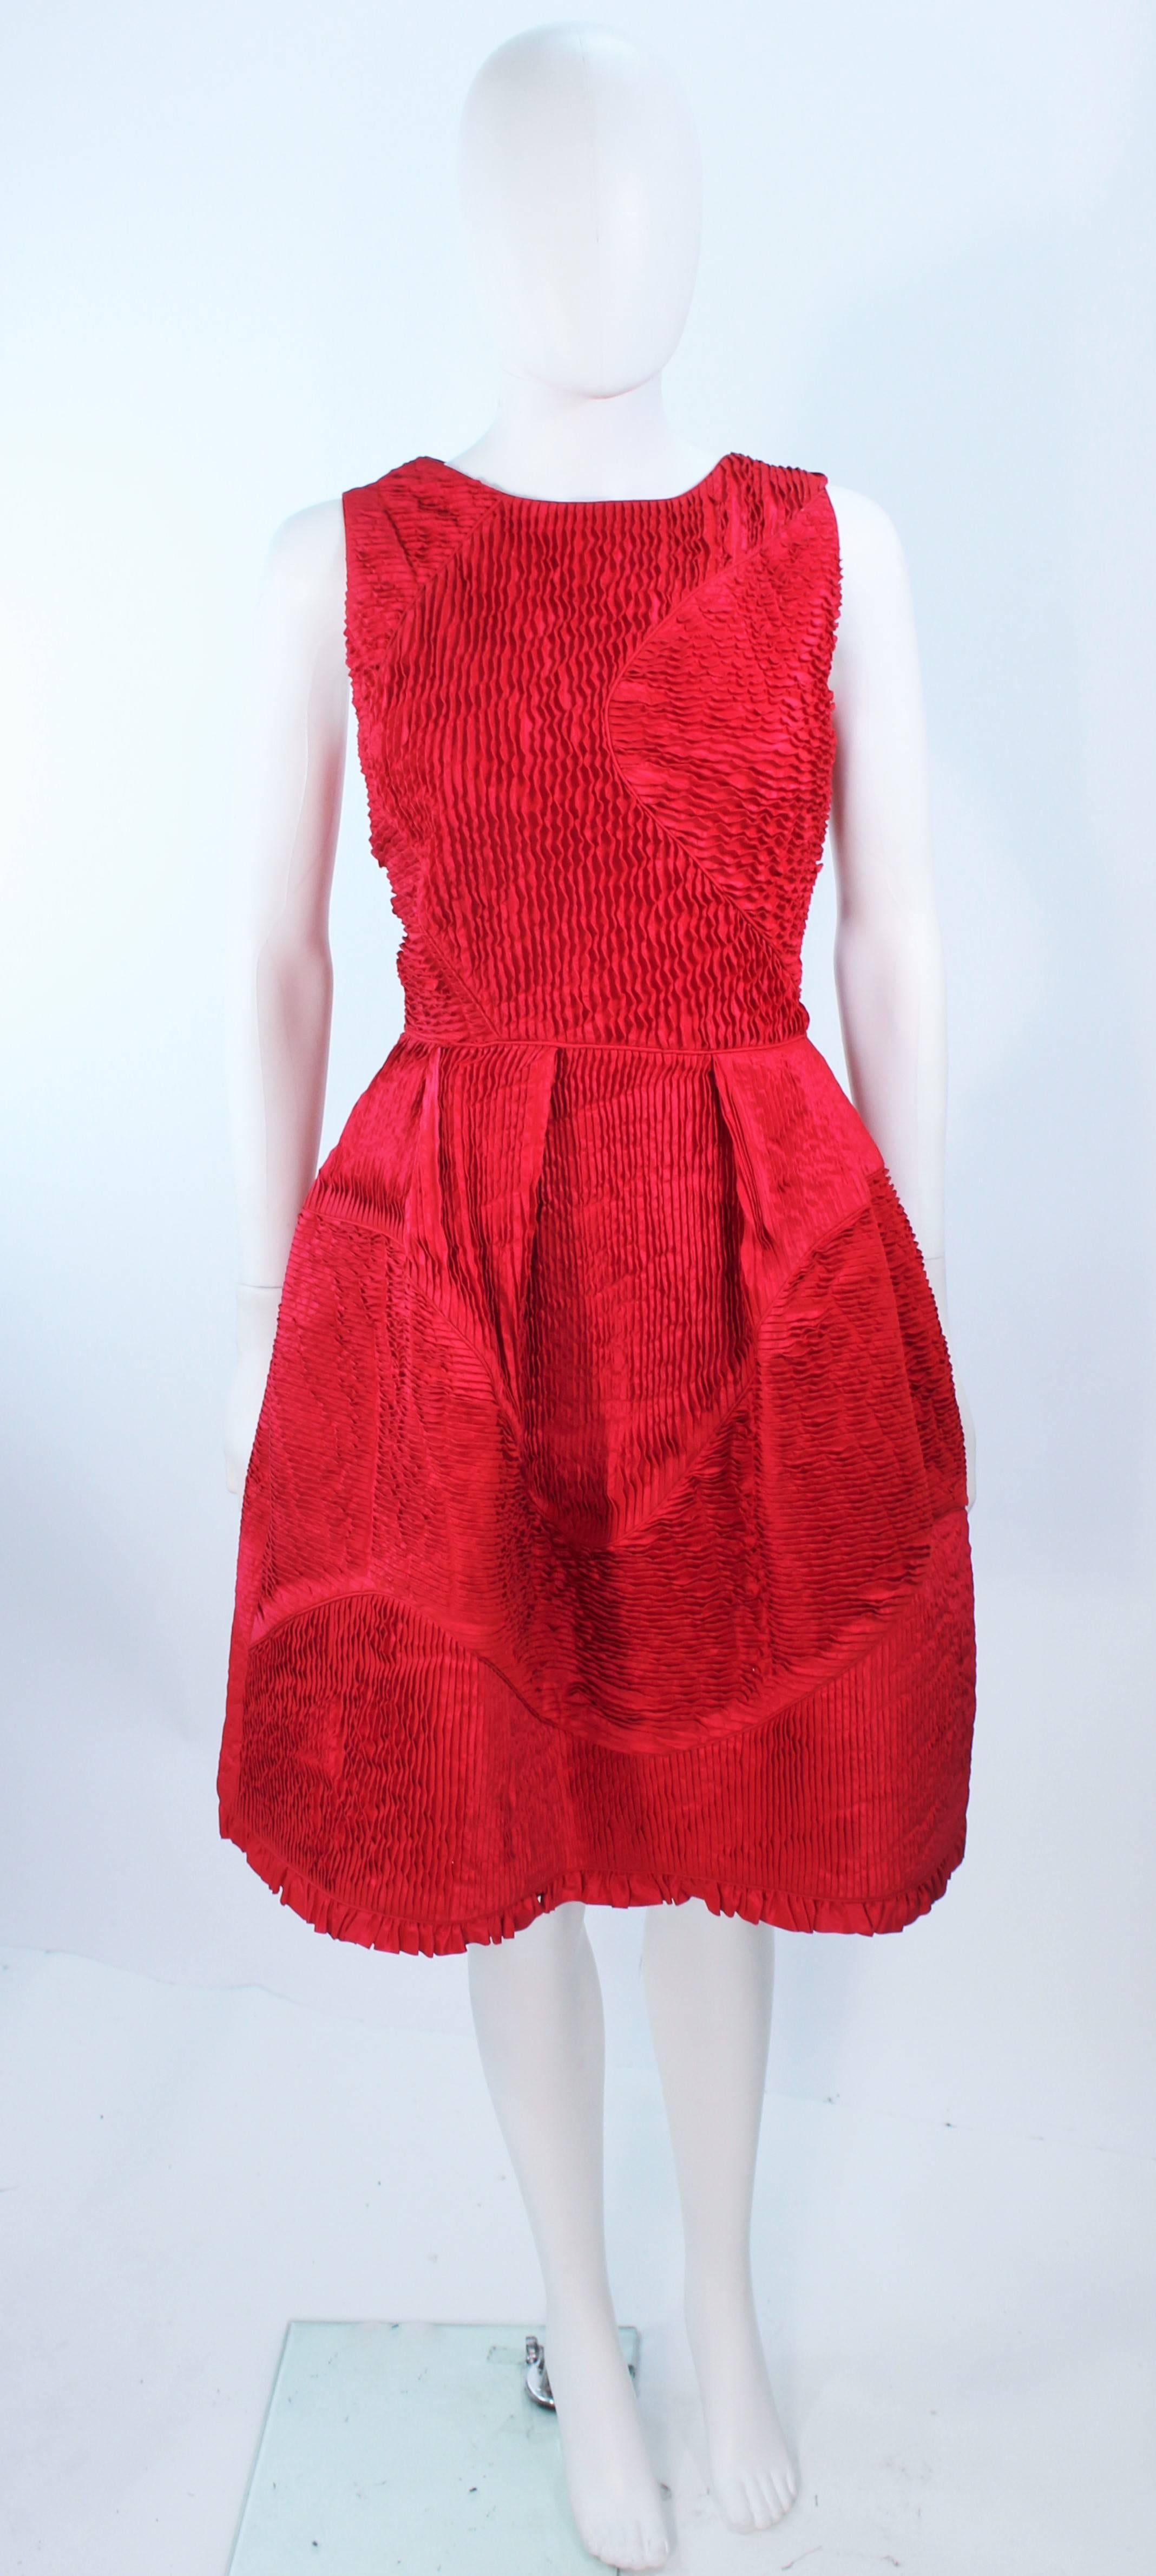 This Oscar De La Renta cocktail dress is composed of a red silk with a pintucked gathered design. Features a side zipper closure with shoulder  buttons. In excellent vintage condition.

**Please cross-reference measurements for personal accuracy.